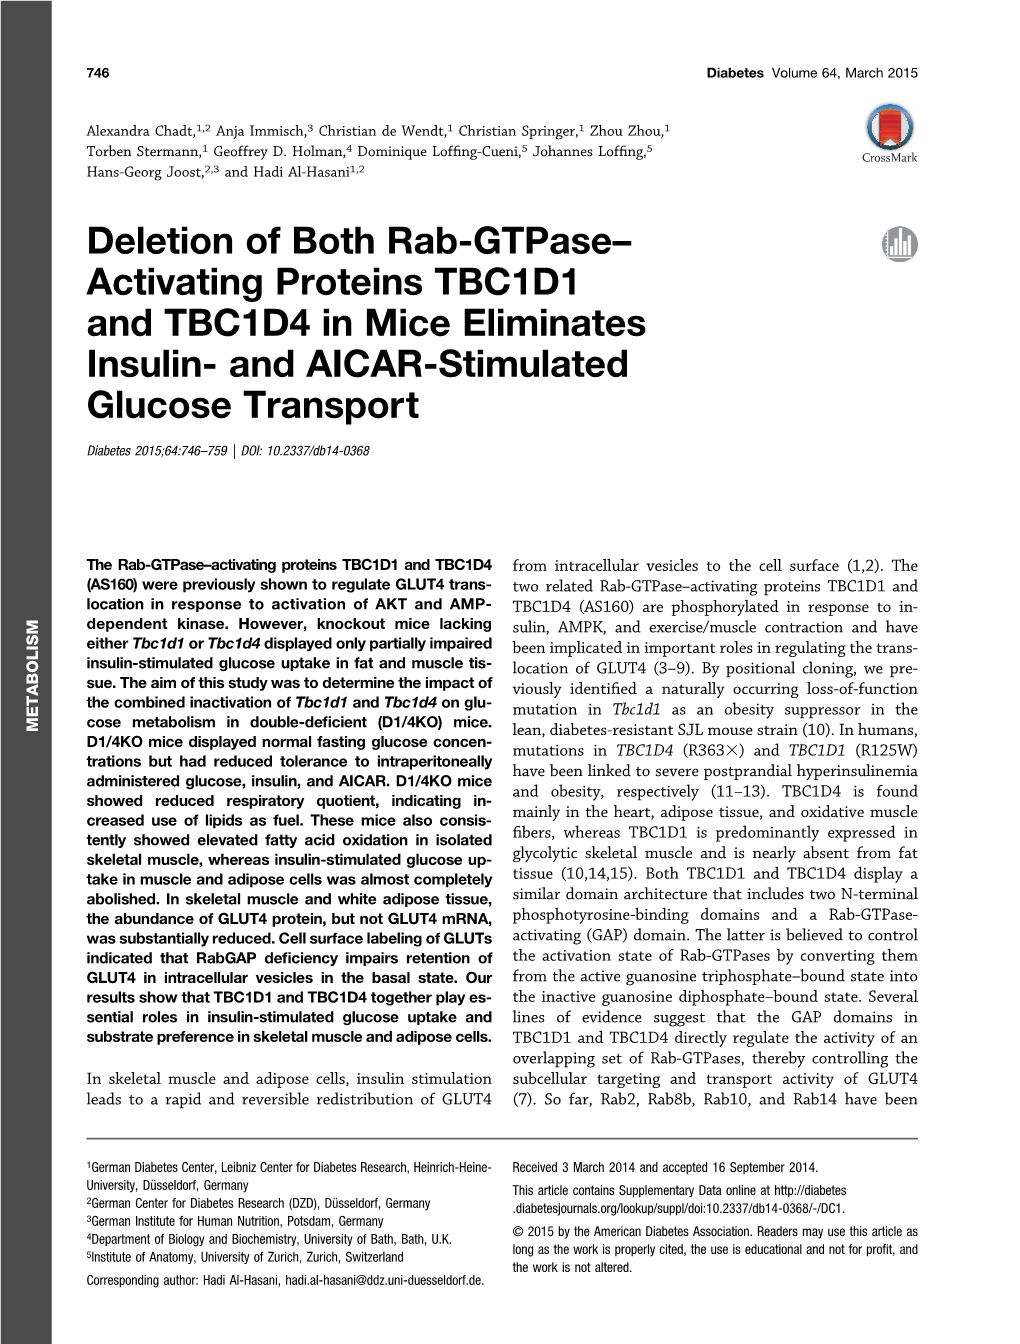 Activating Proteins TBC1D1 and TBC1D4 in Mice Eliminates Insulin- and AICAR-Stimulated Glucose Transport